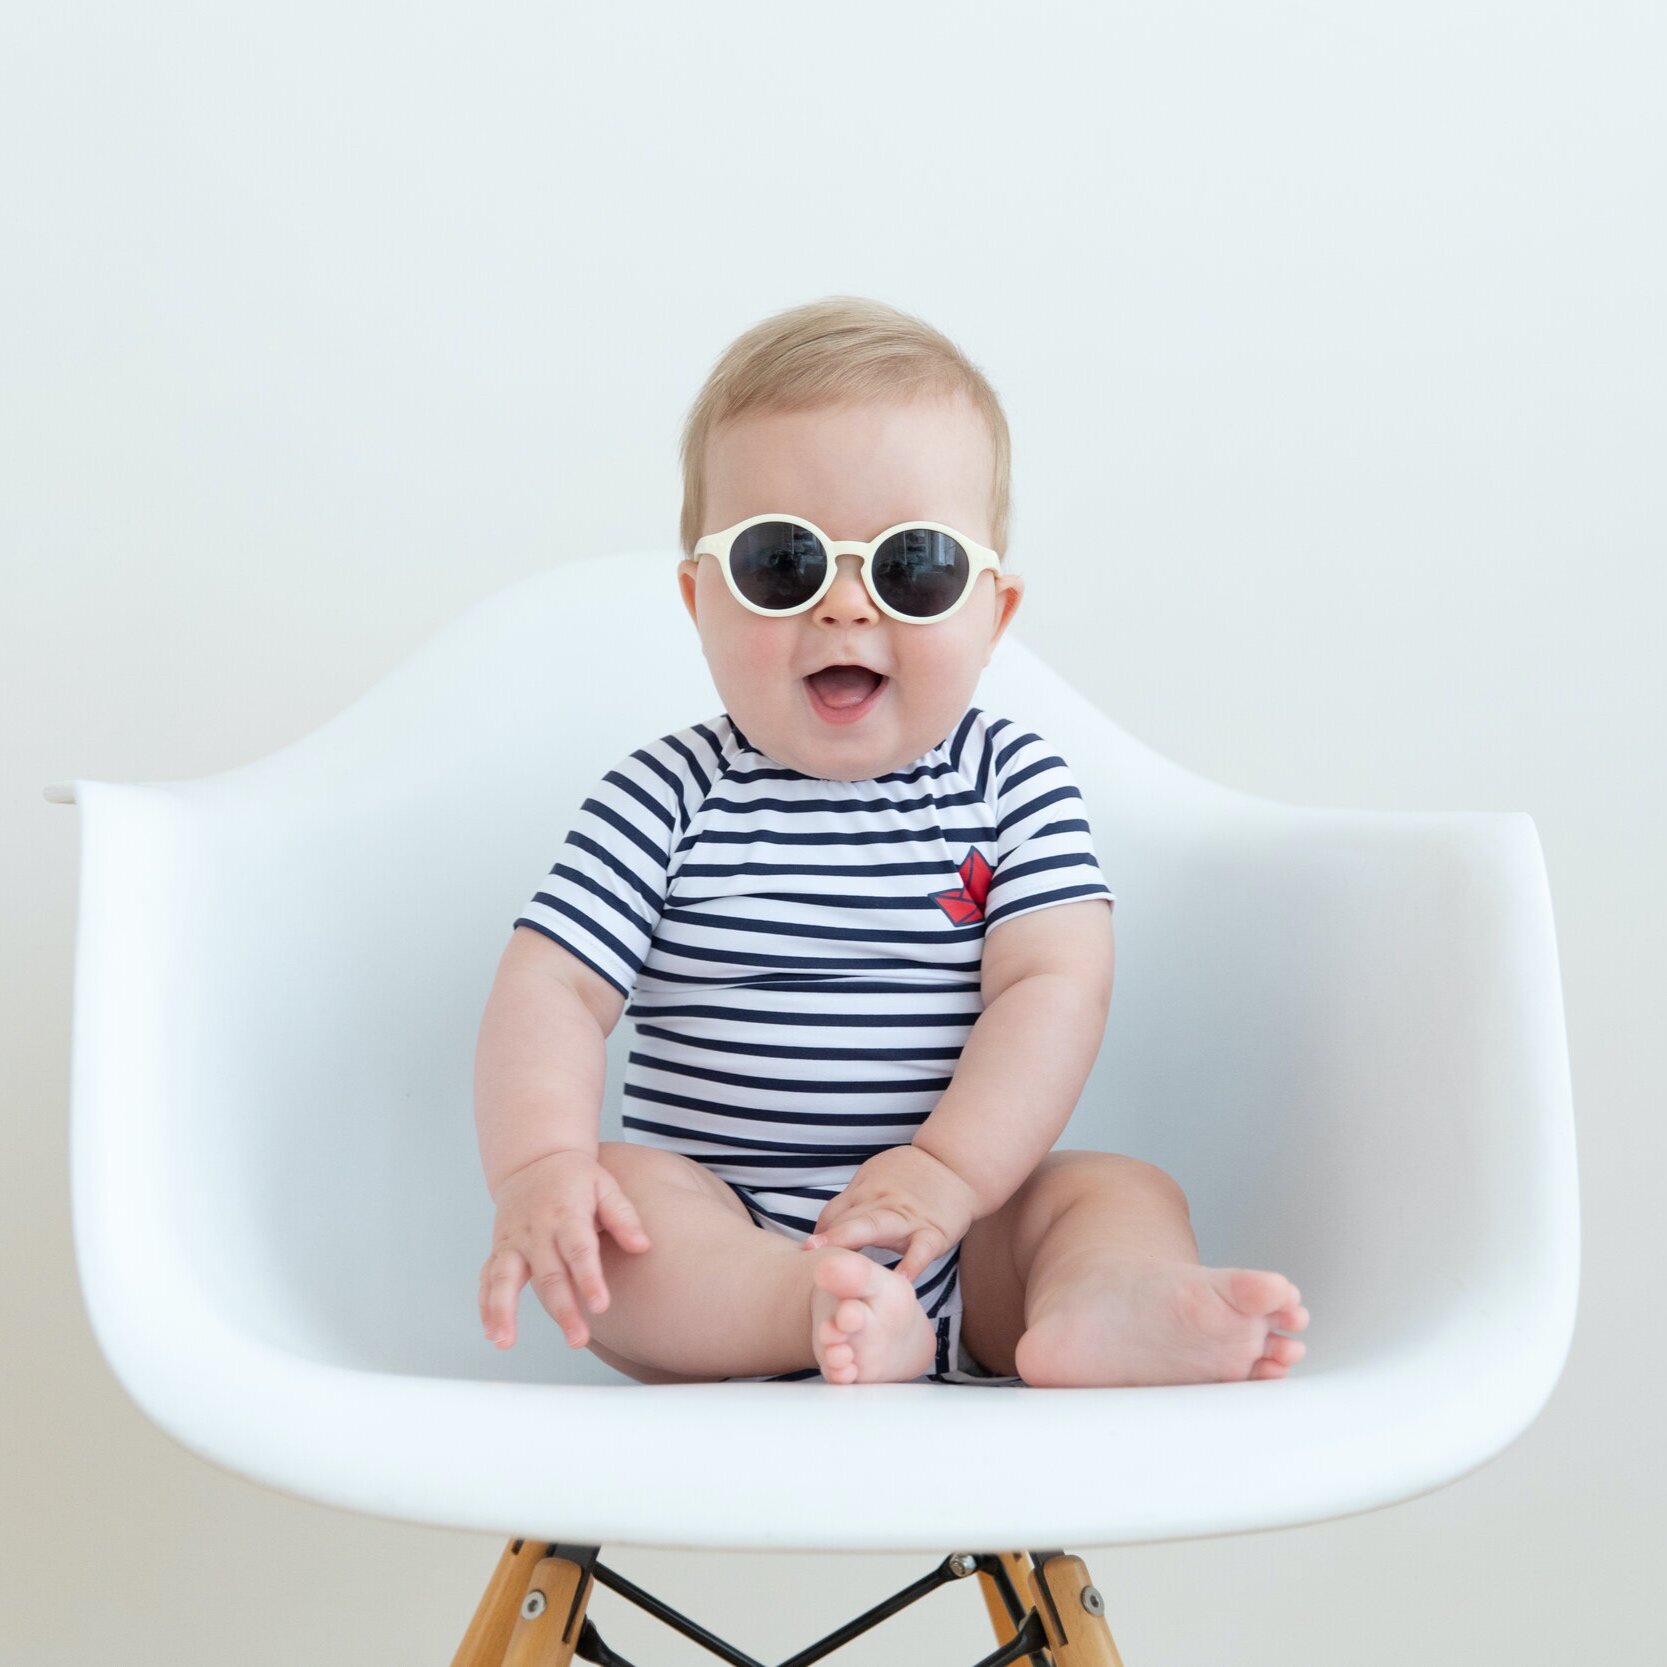 Baby boy wearing sunglasses and sitting in a chair for his six month session.